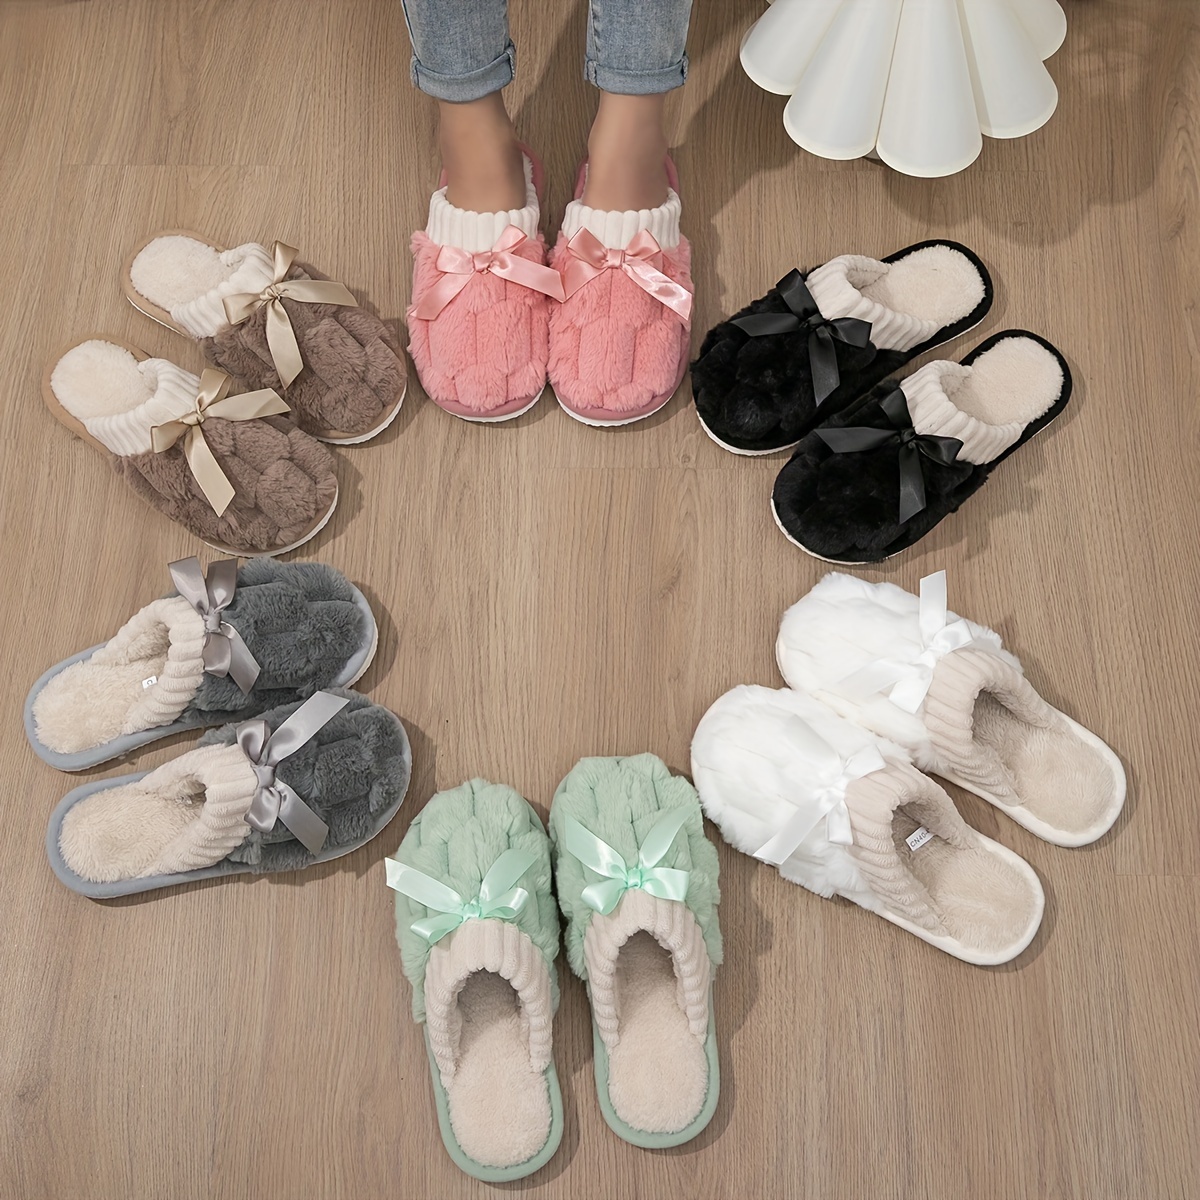 

Soft Sole Fuzzy Slippers, Indoor Comfort Plush Lined Warm Bowknot Slippers, Closed Toe Non-slip Cozy House Slippers